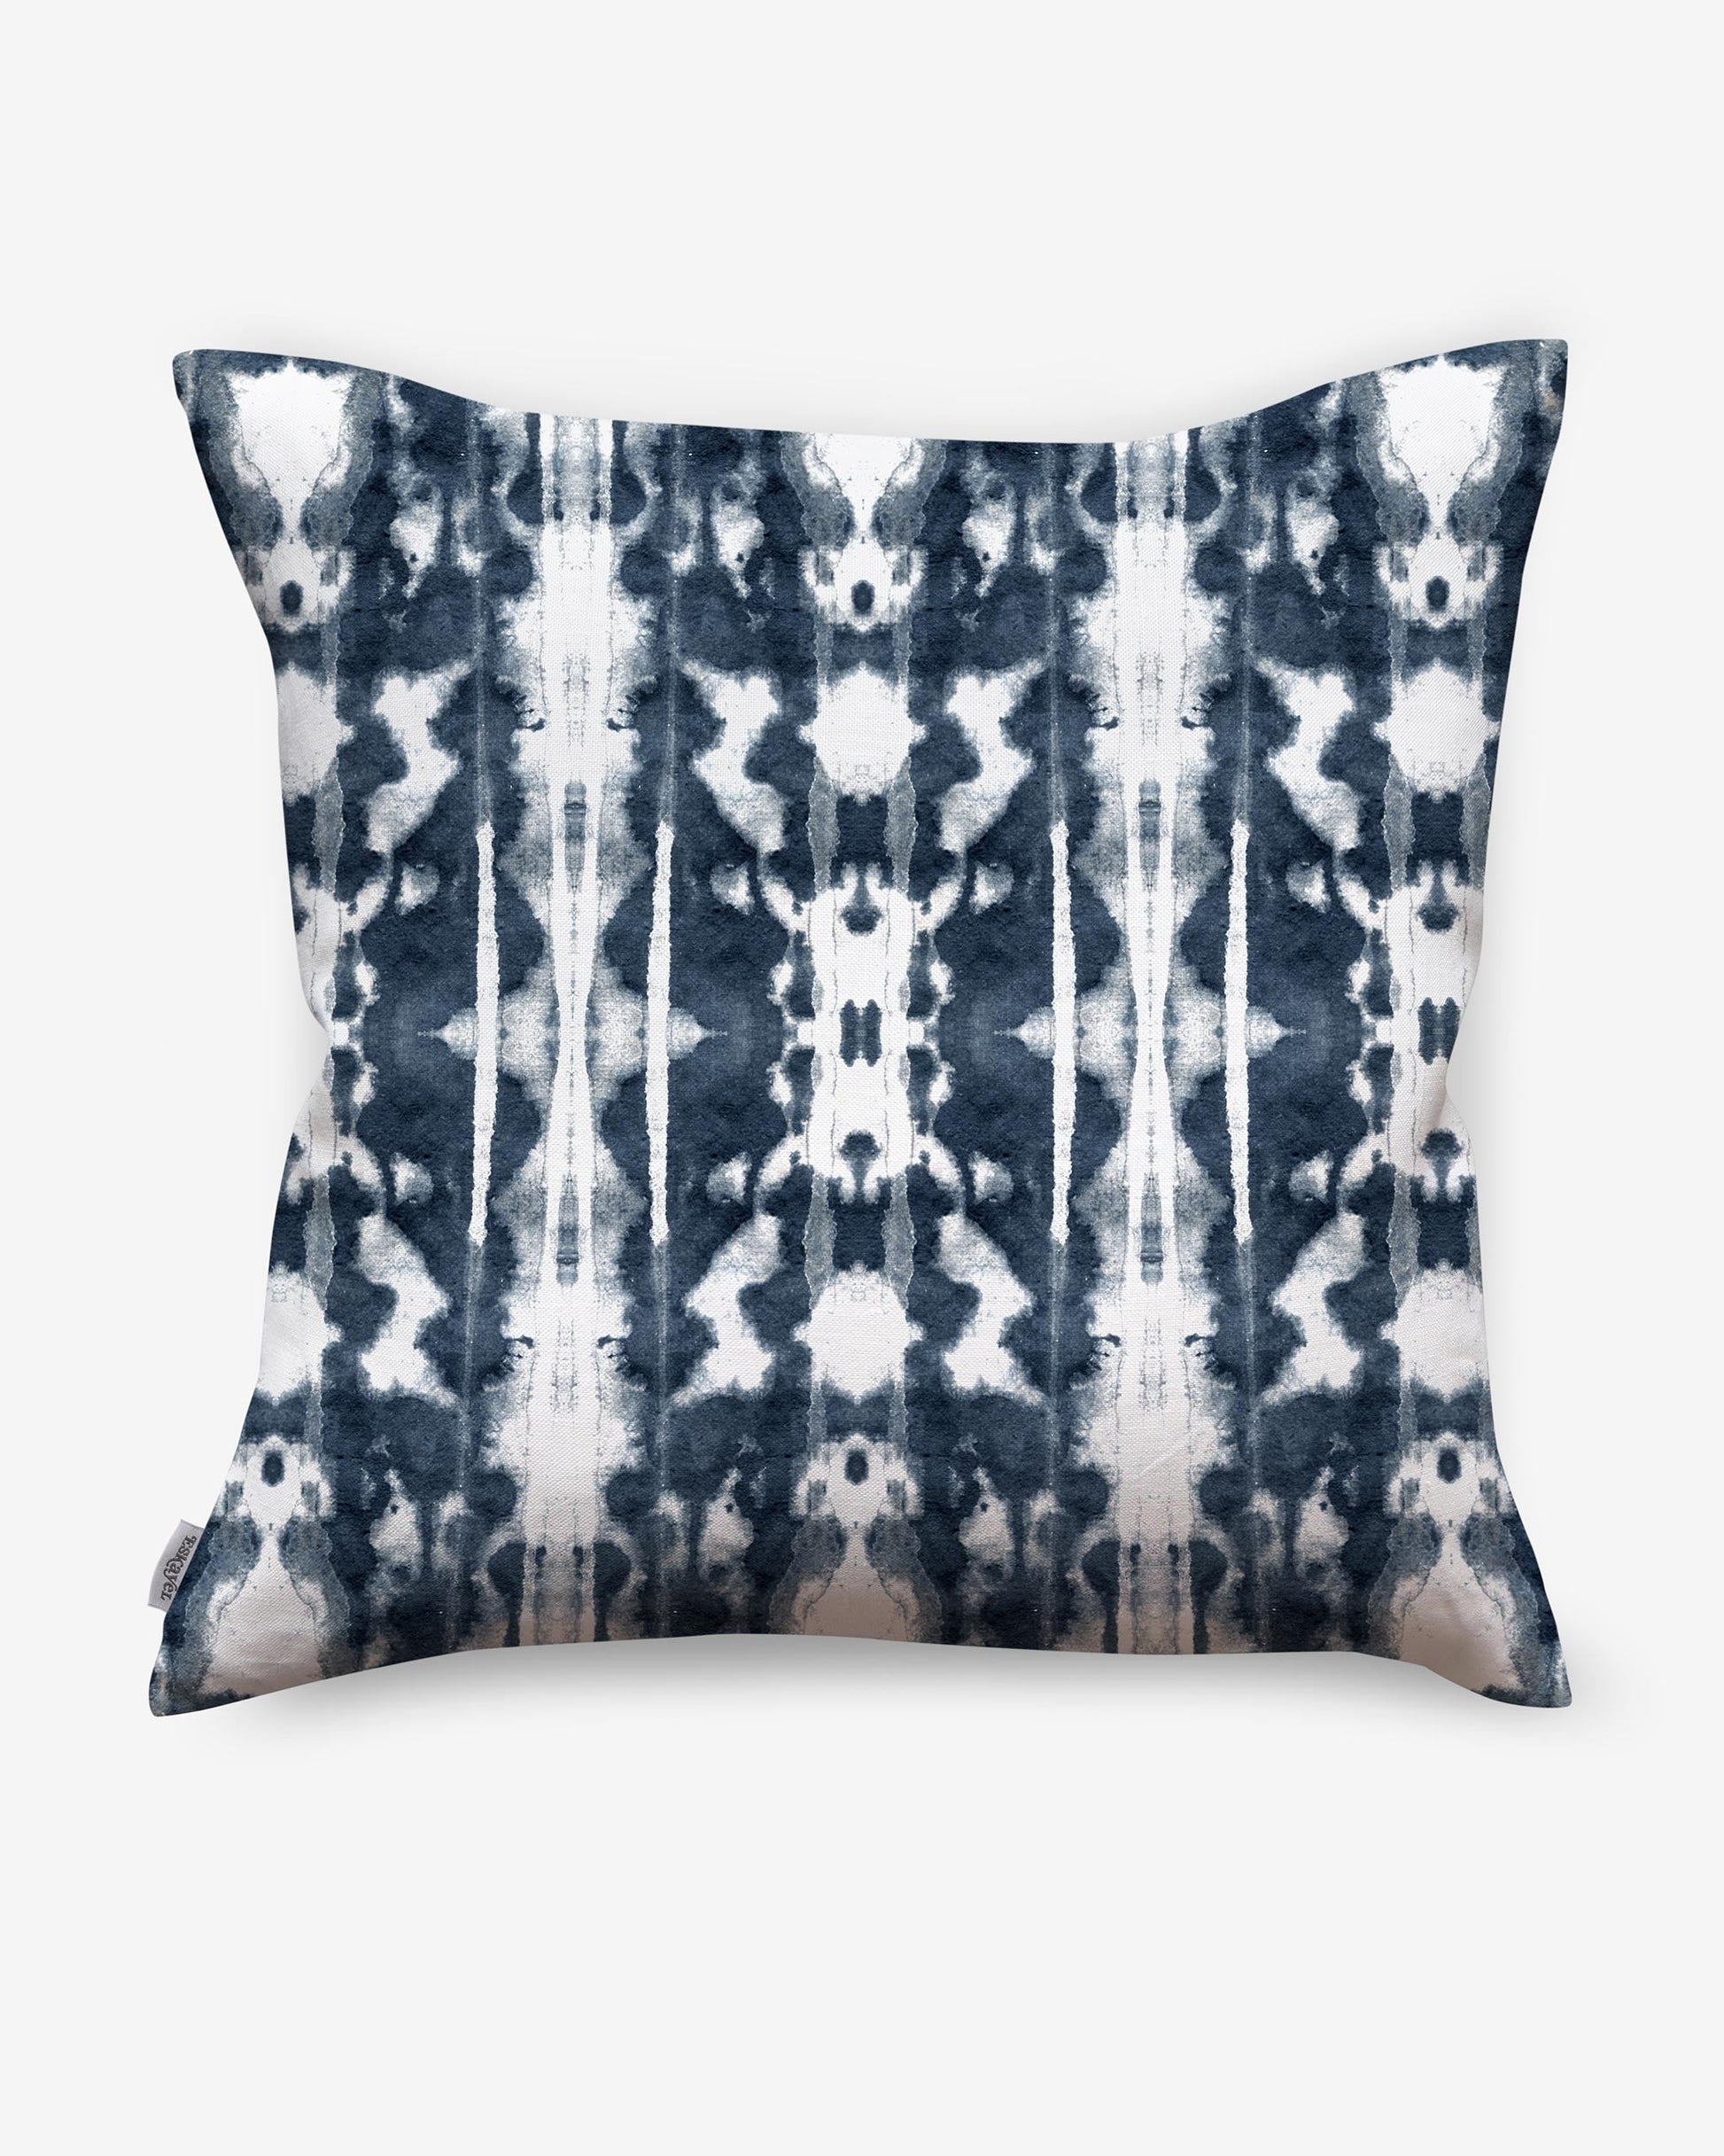 A blue and white Biami Pillow||Nila with an abstract Biami pattern design.